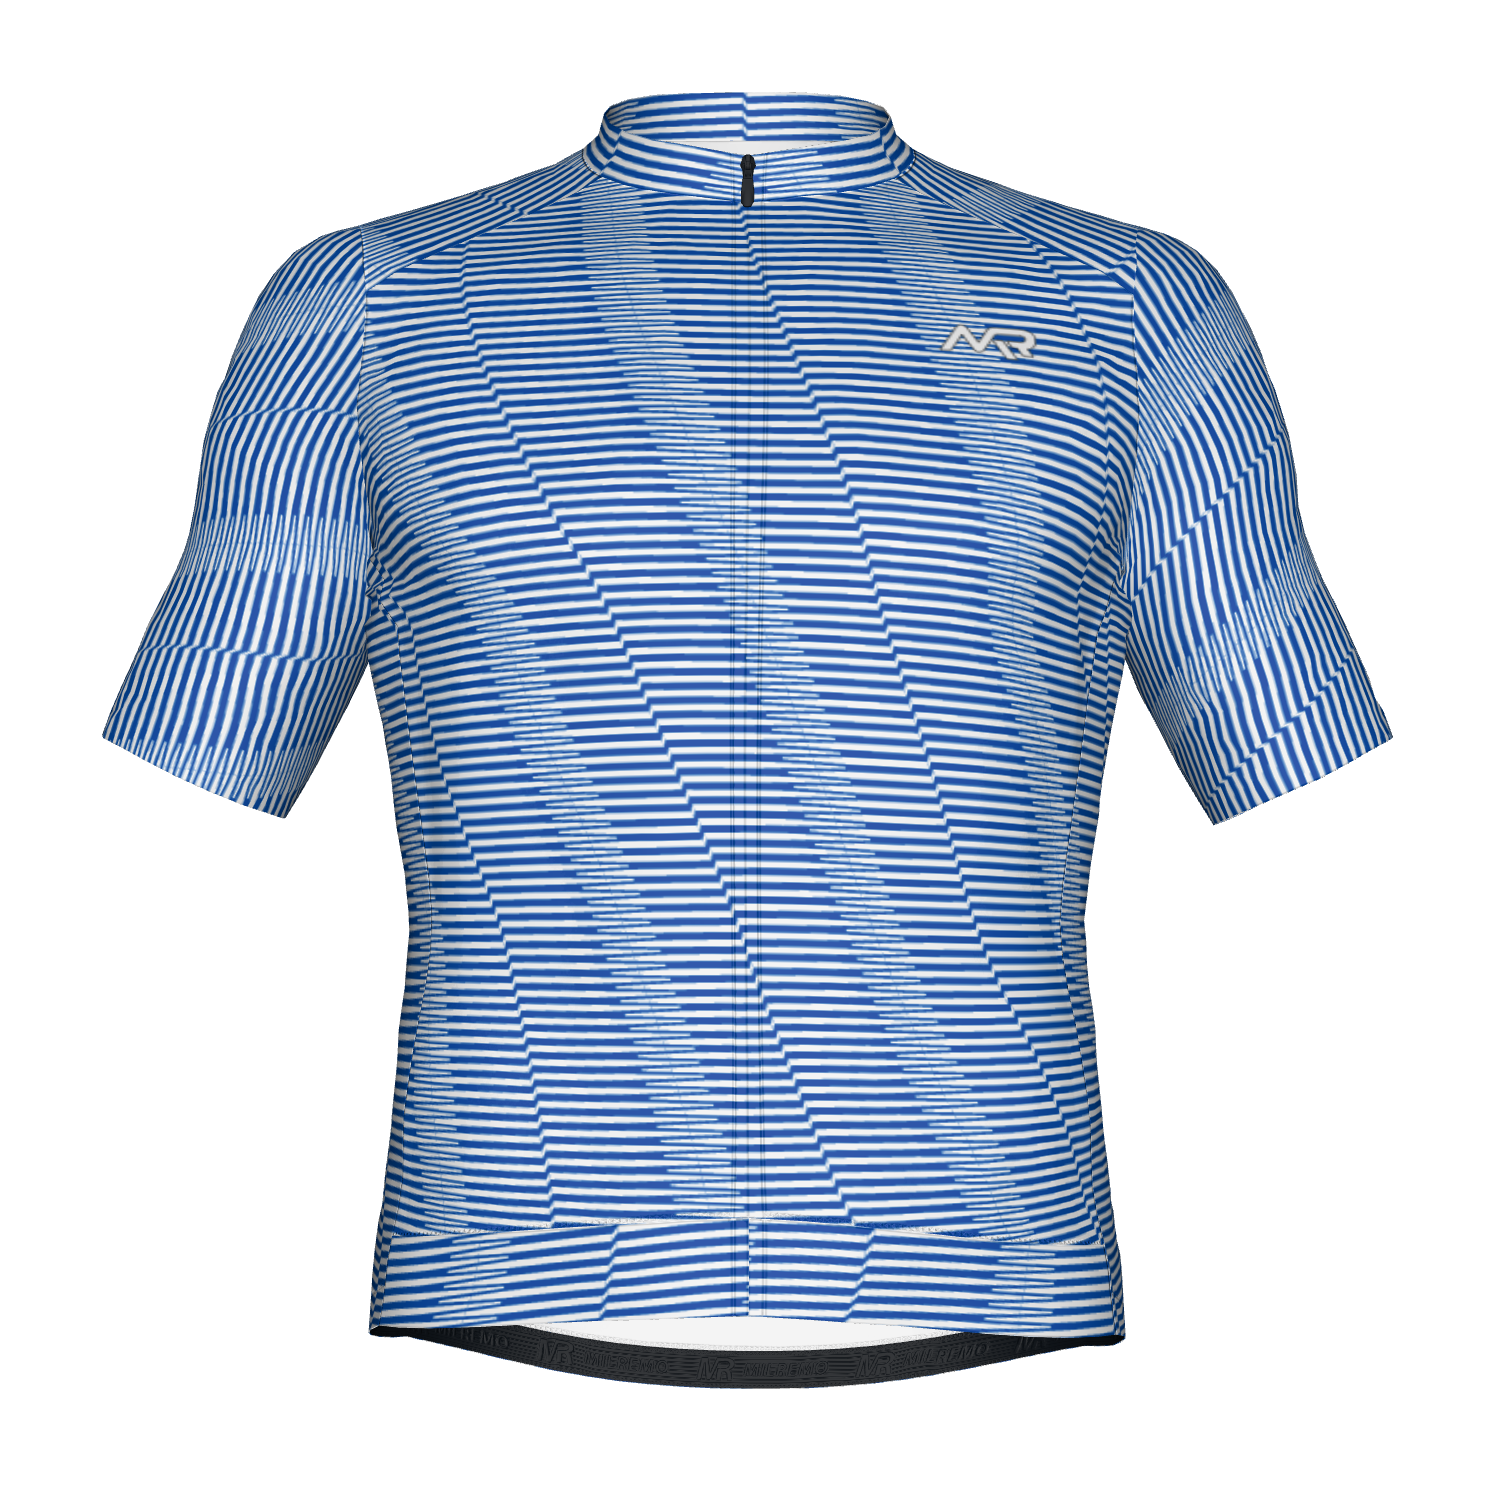 Criterium cycling jersey s/s